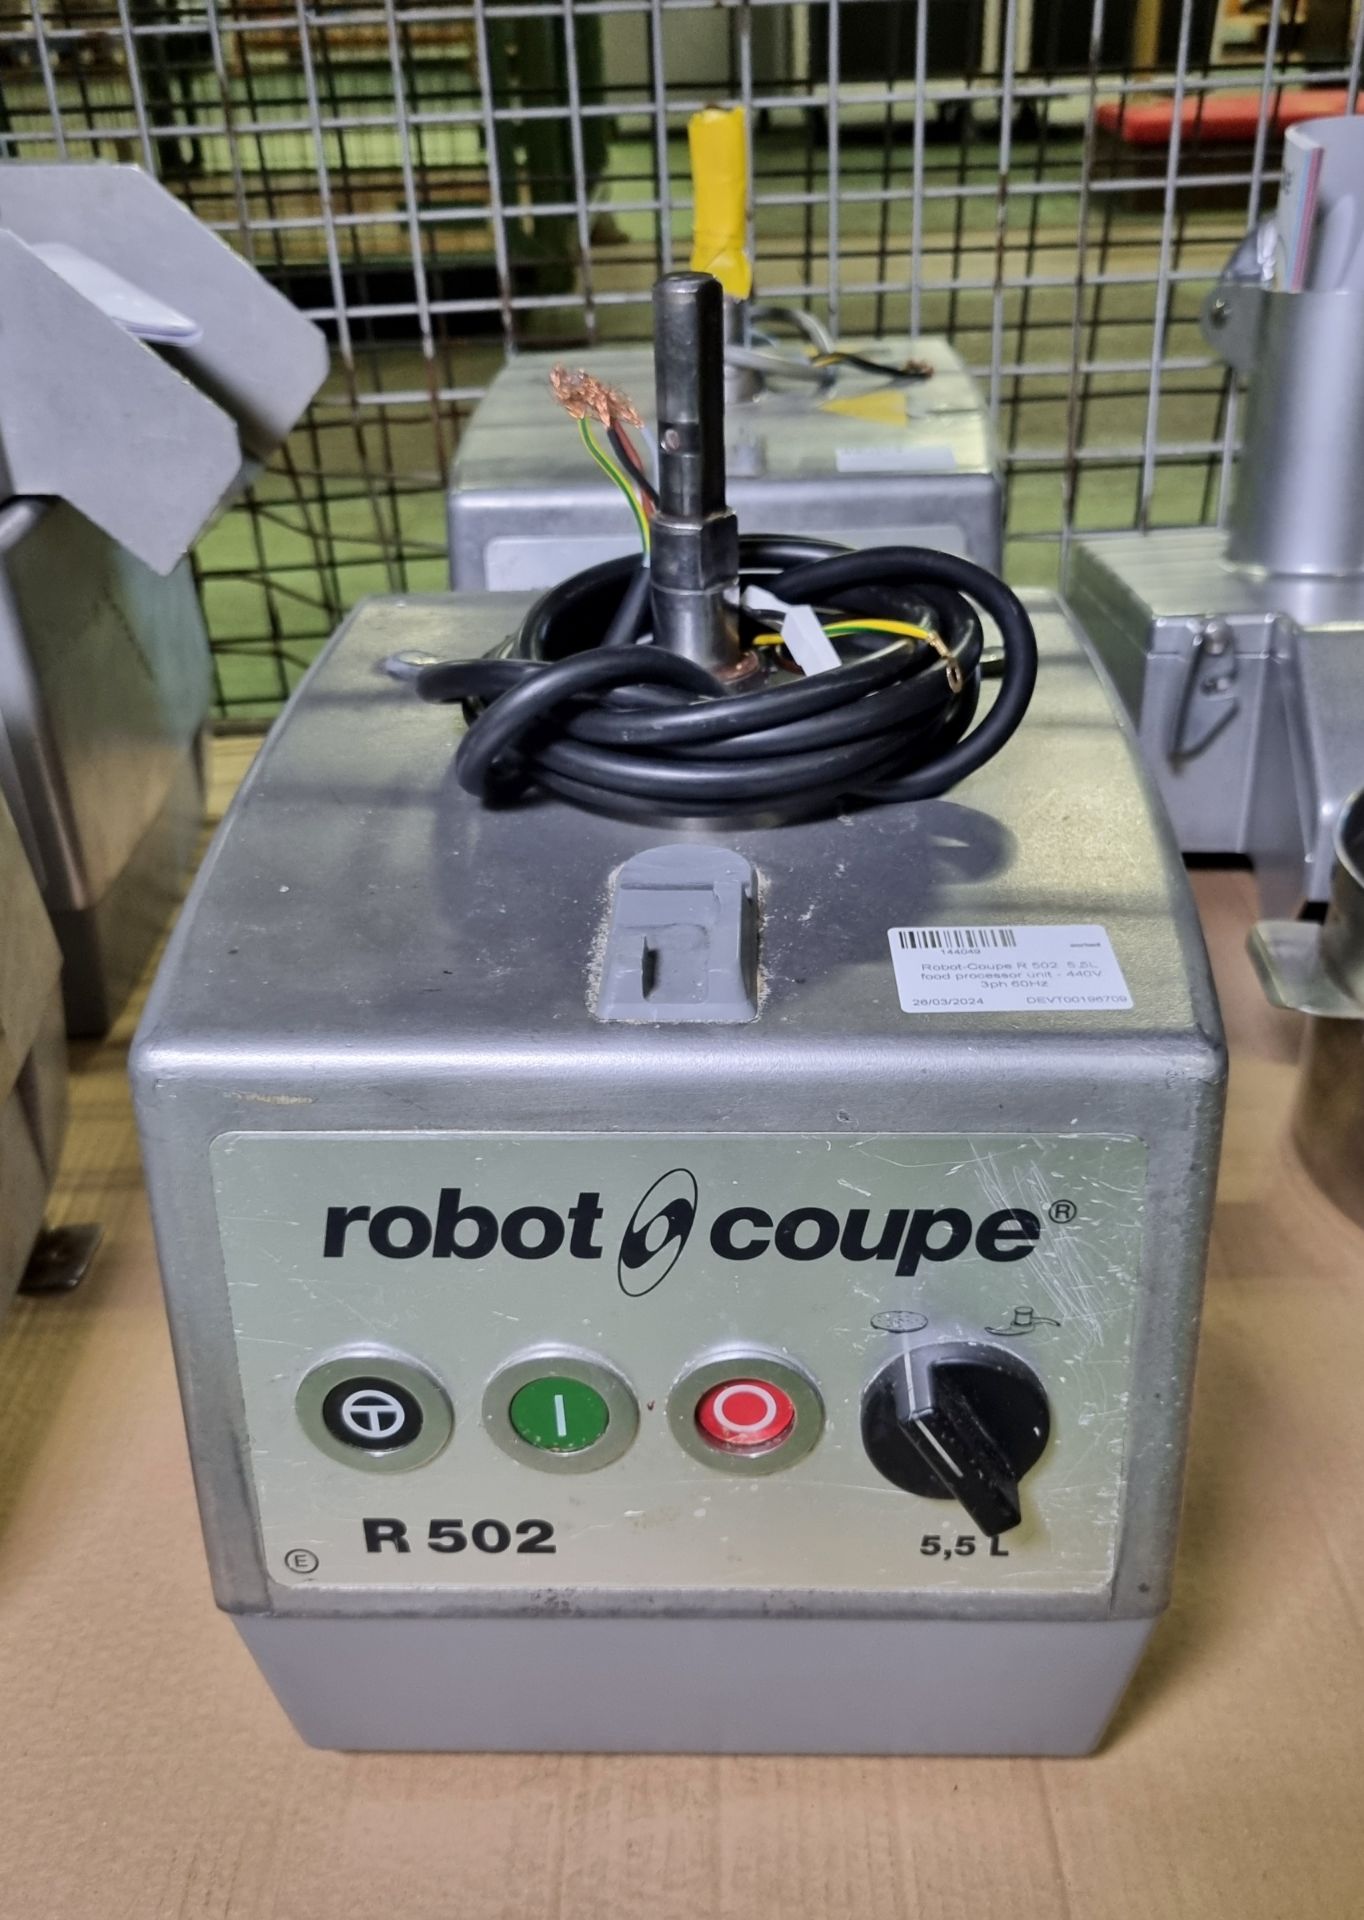 Robot-Coupe equipment - full details in description - Image 4 of 8